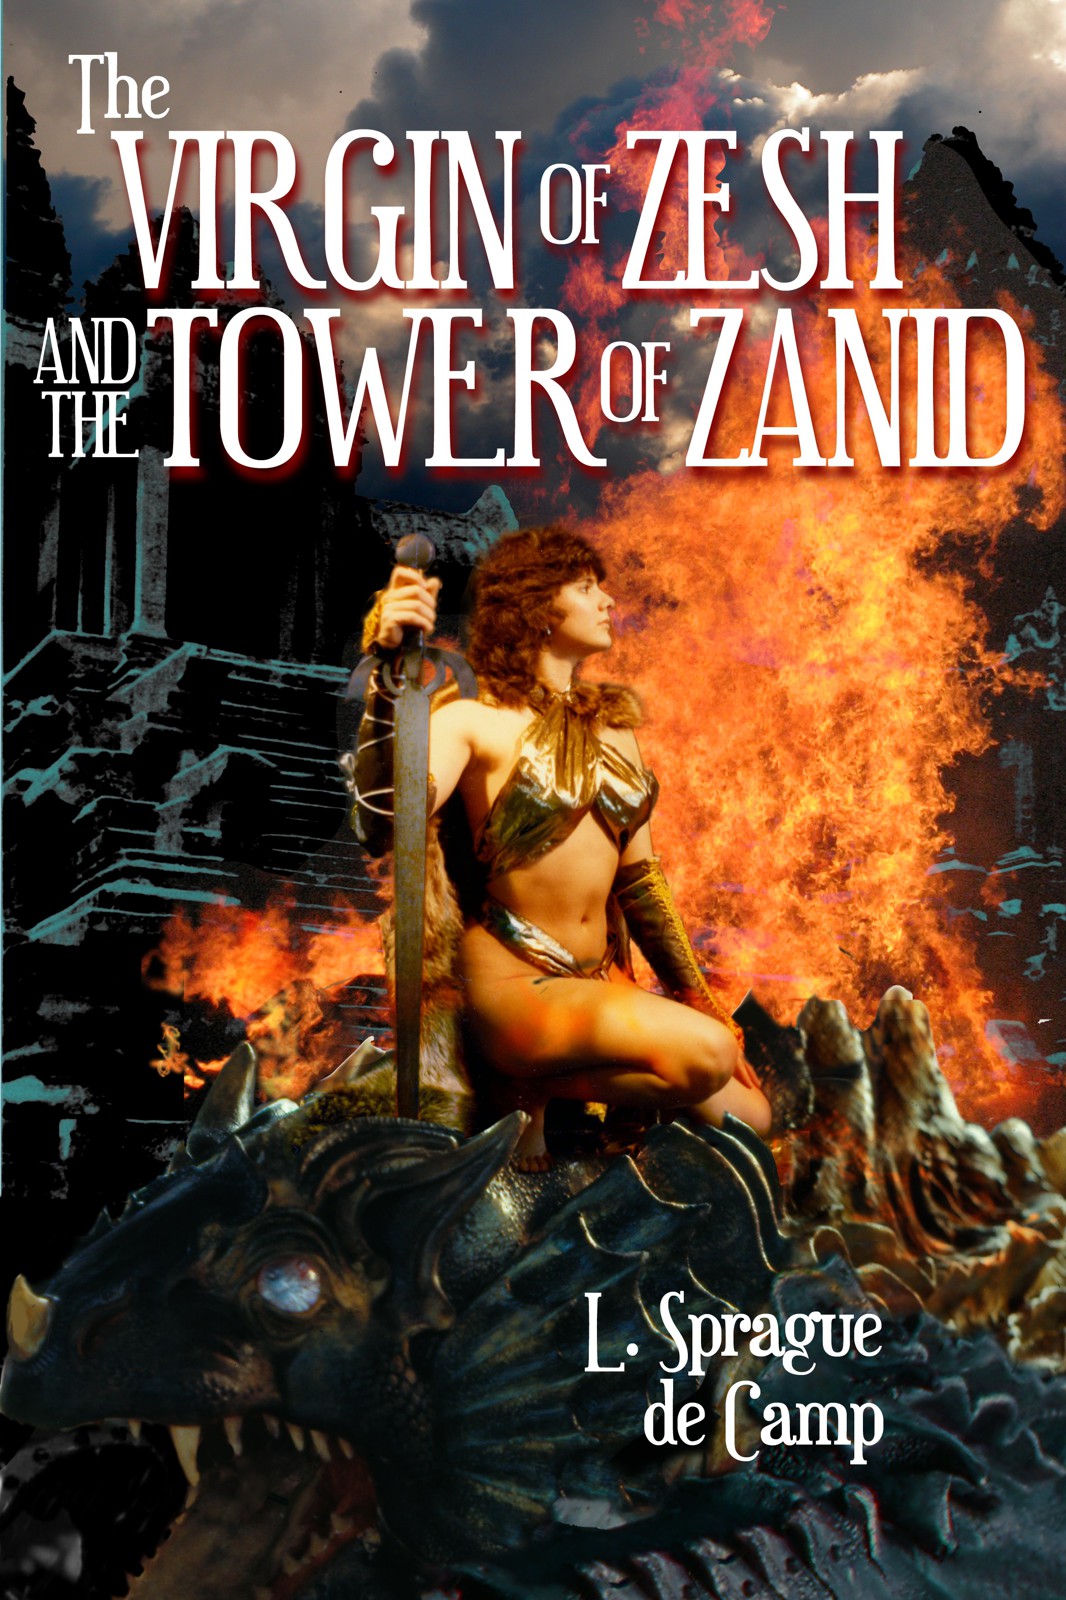 The Virgin of Zesh & the Tower of Zanid by L. Sprague de Camp